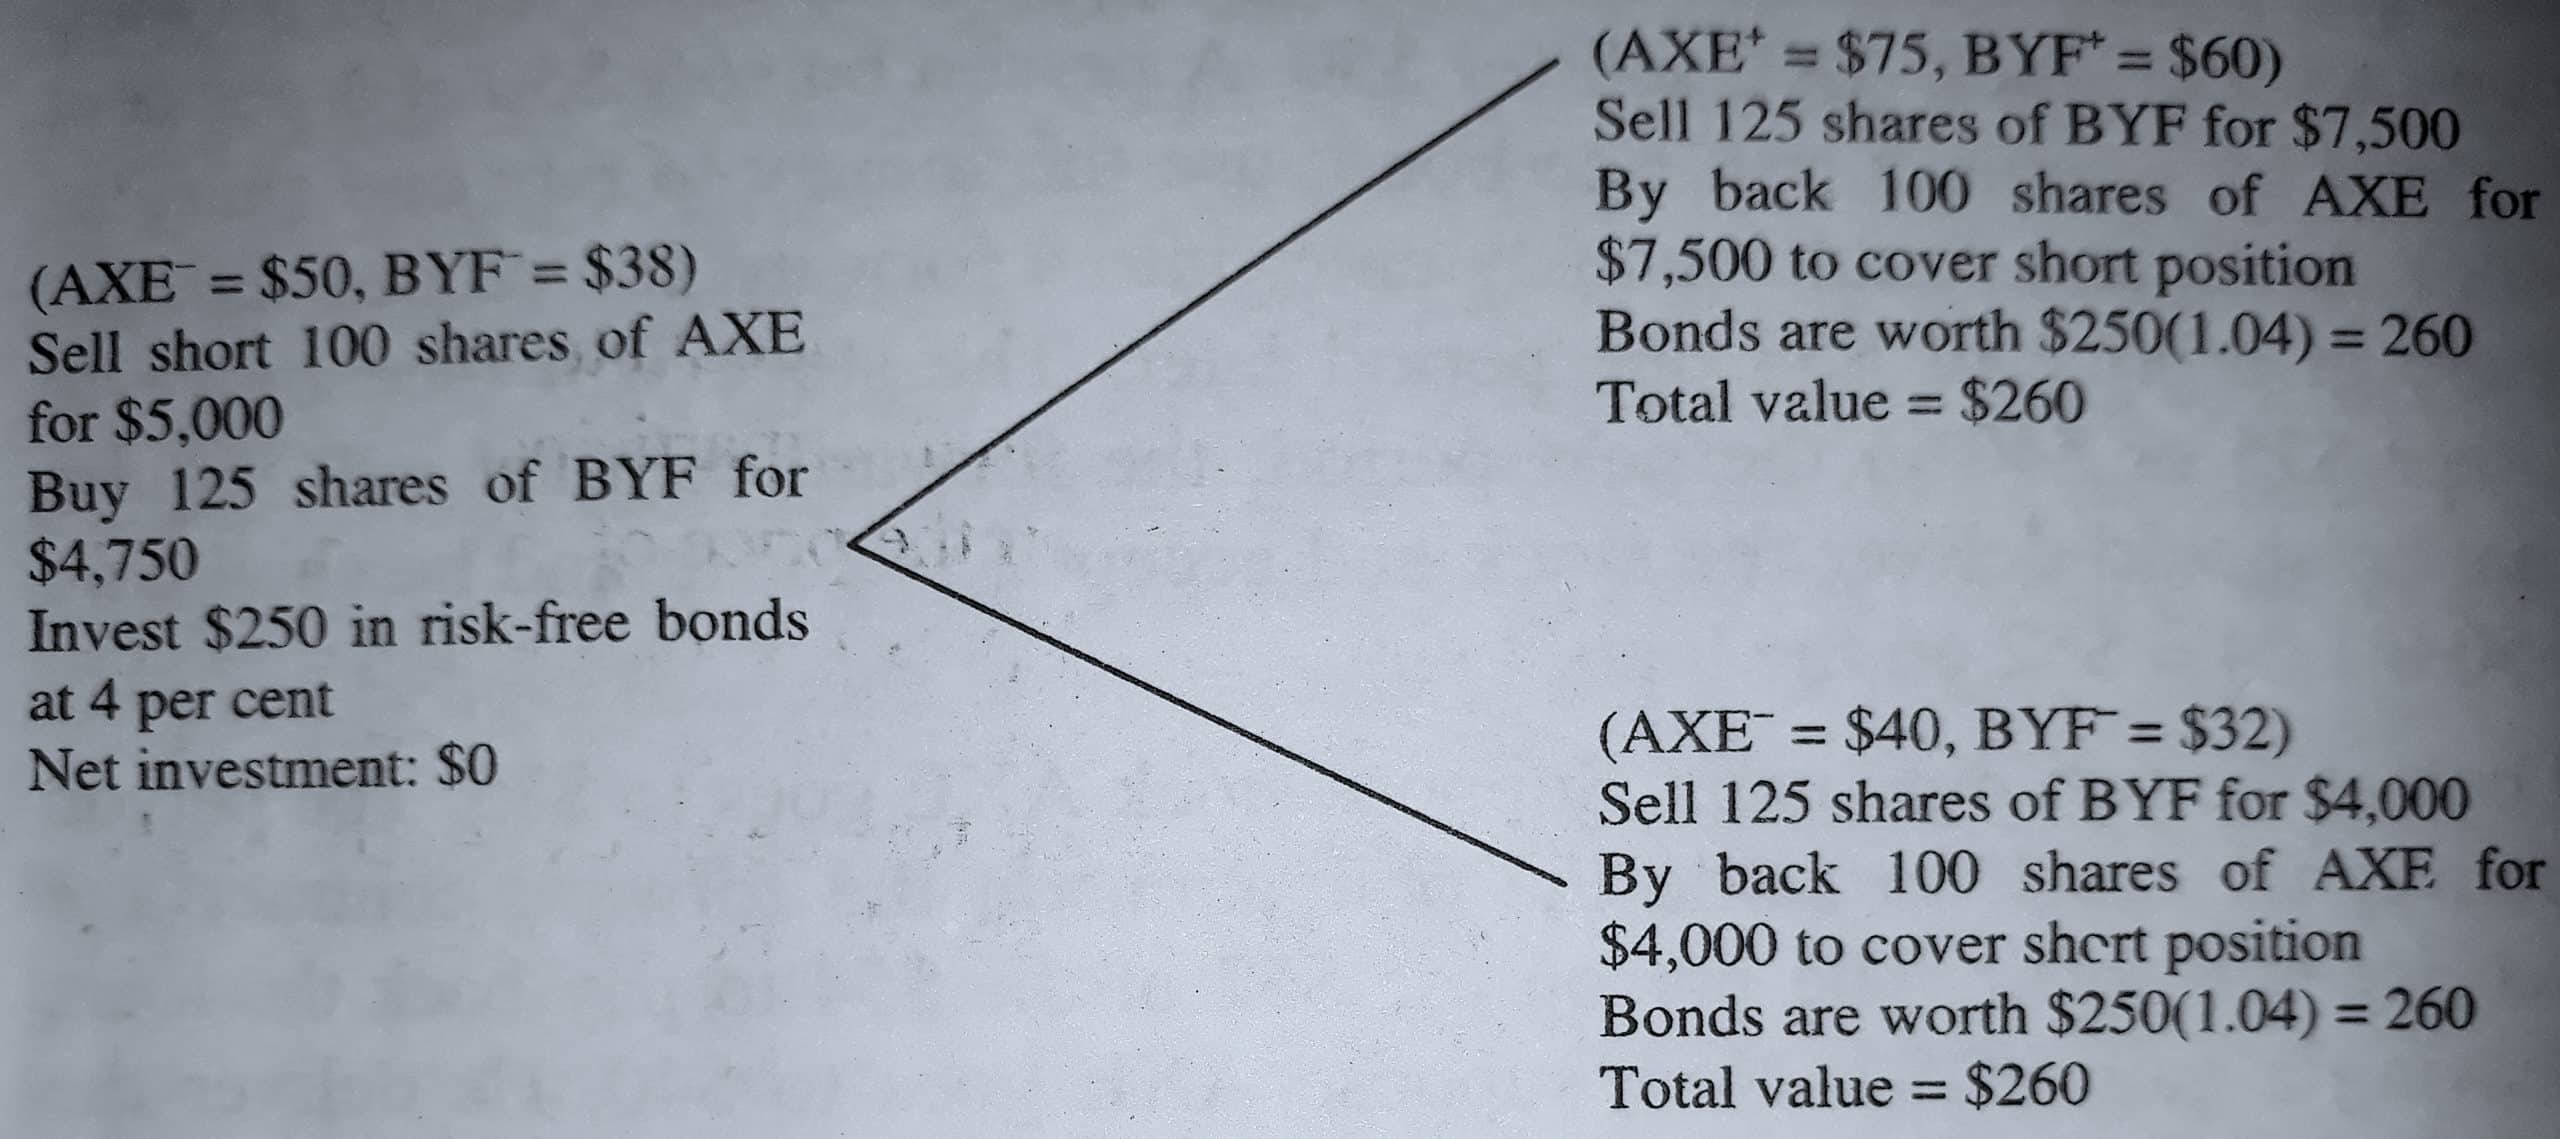 Execution of Arbitrage Transaction with Stock AXE,Stock BYF, and a Risk-Free Bond